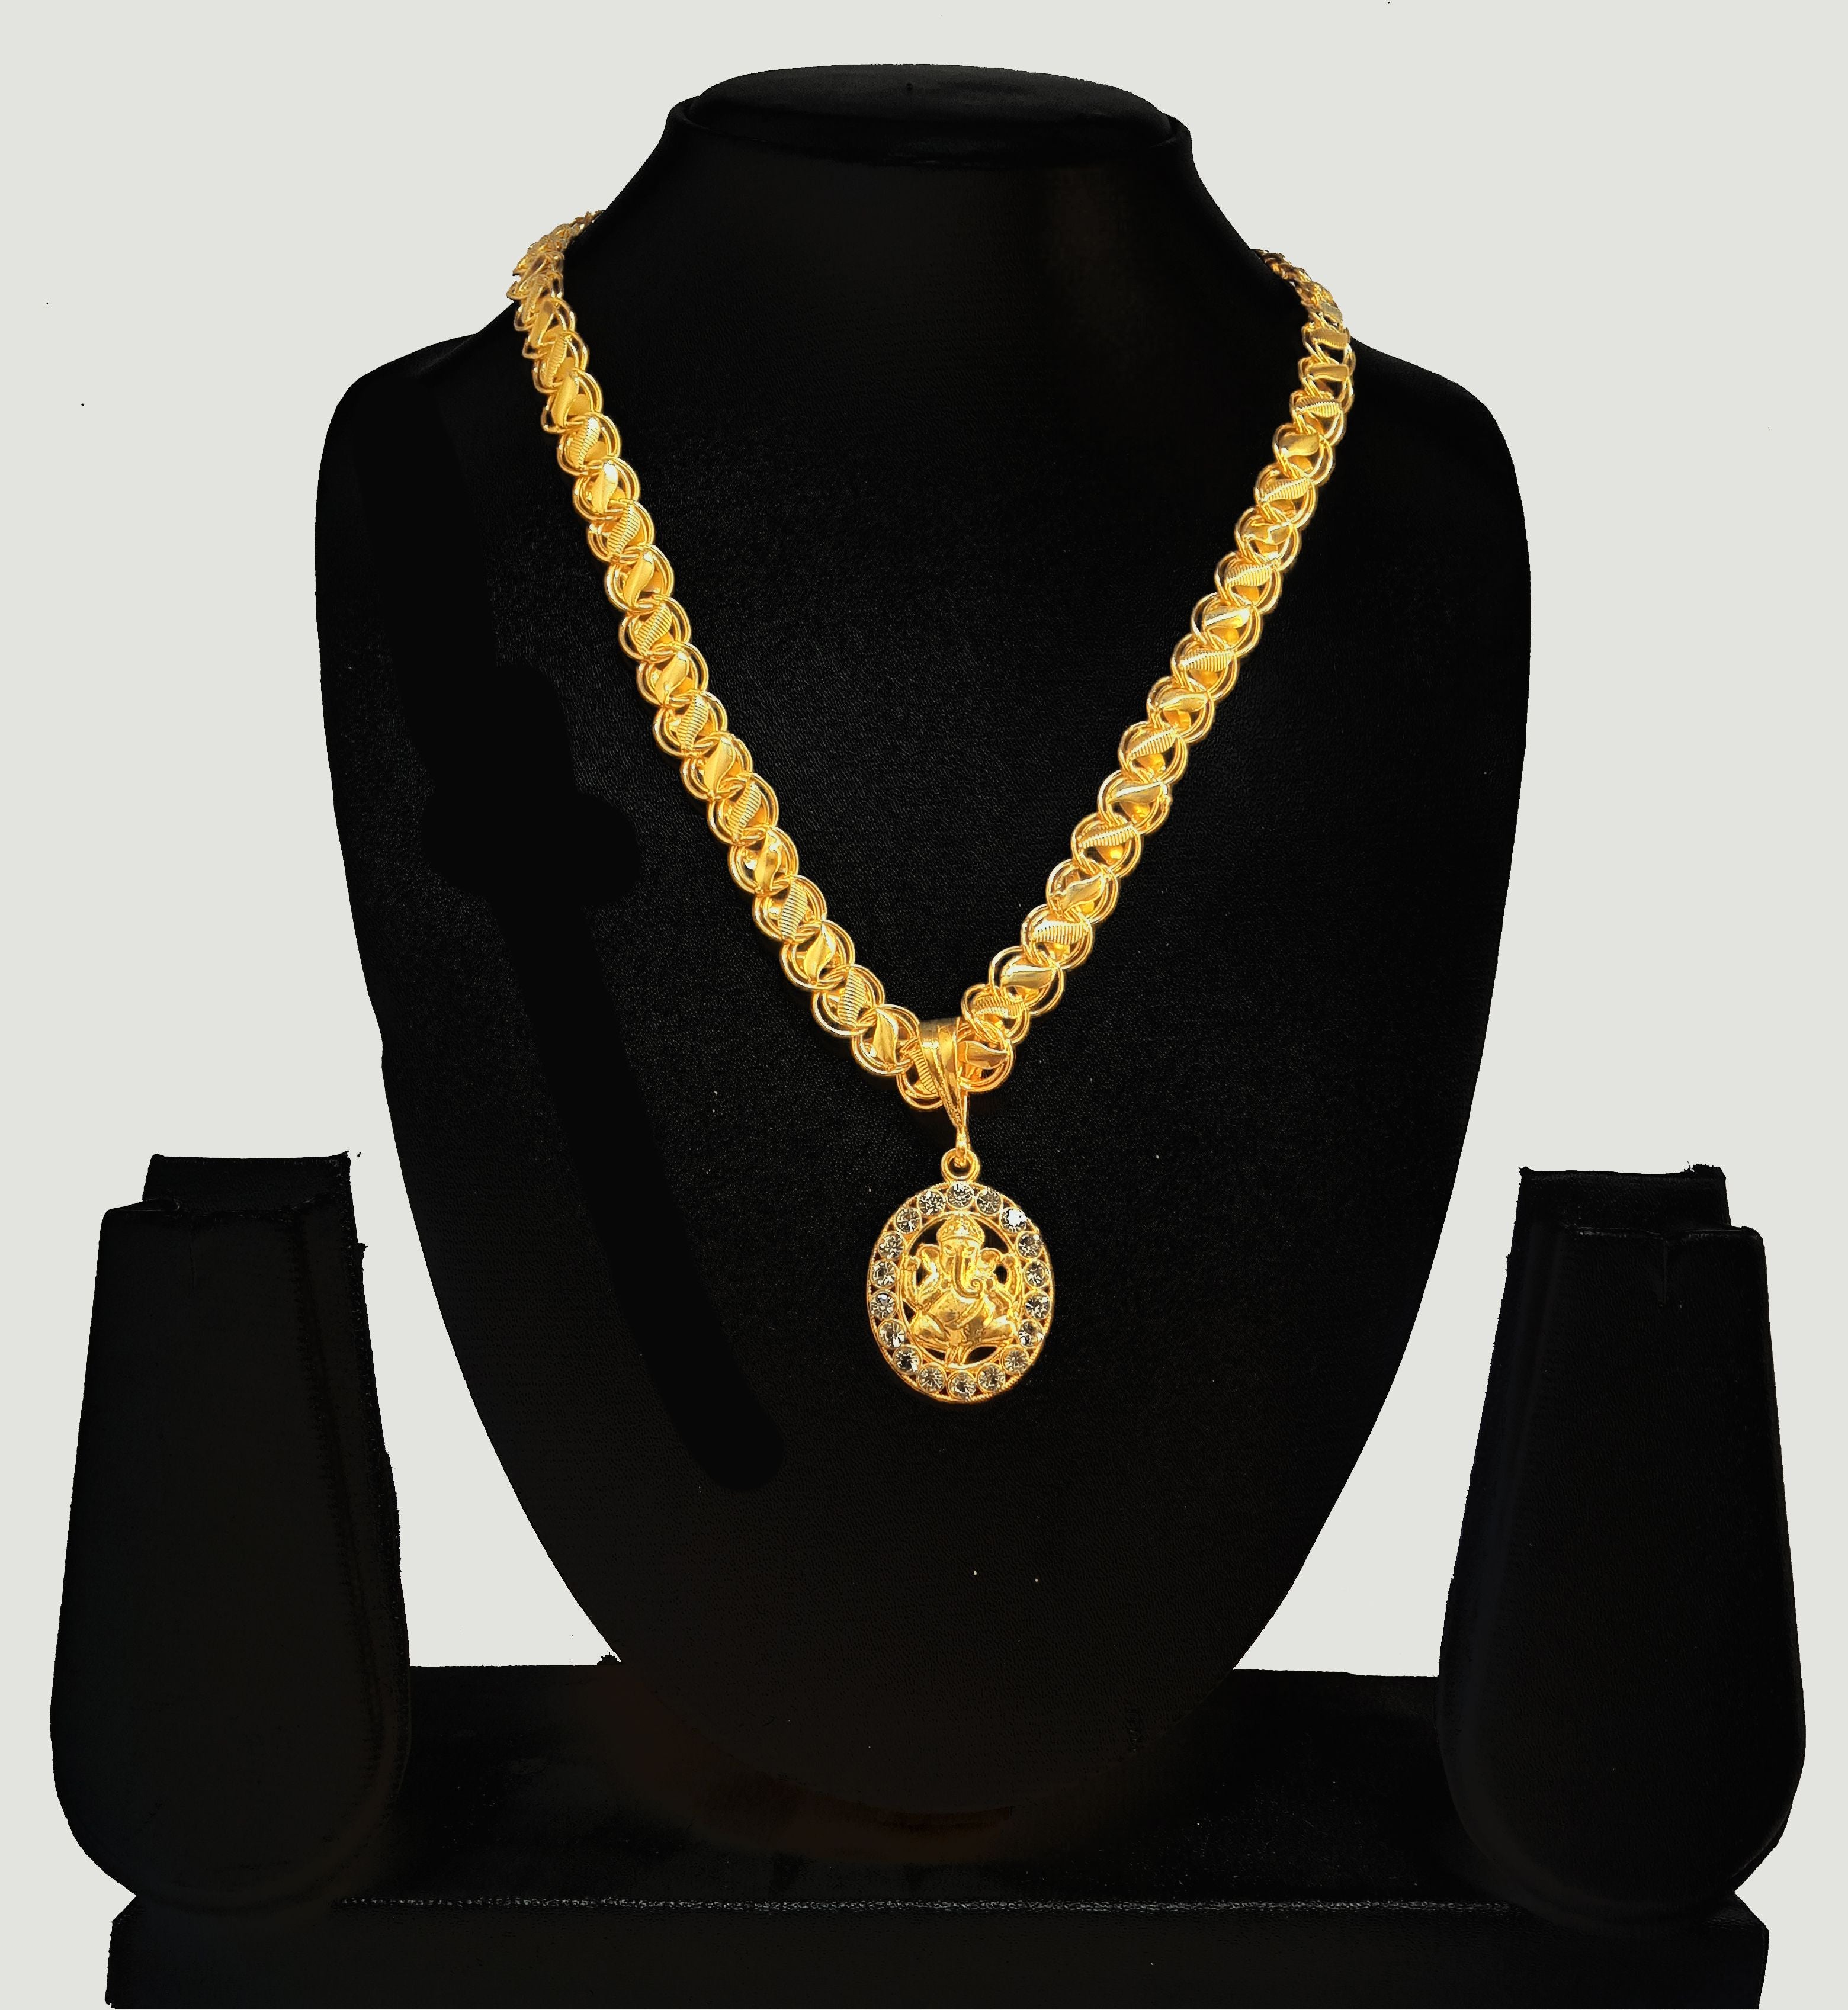 Luxurious Men's Gold Plated Pendant With Chain Vol 4  Glitstudio   